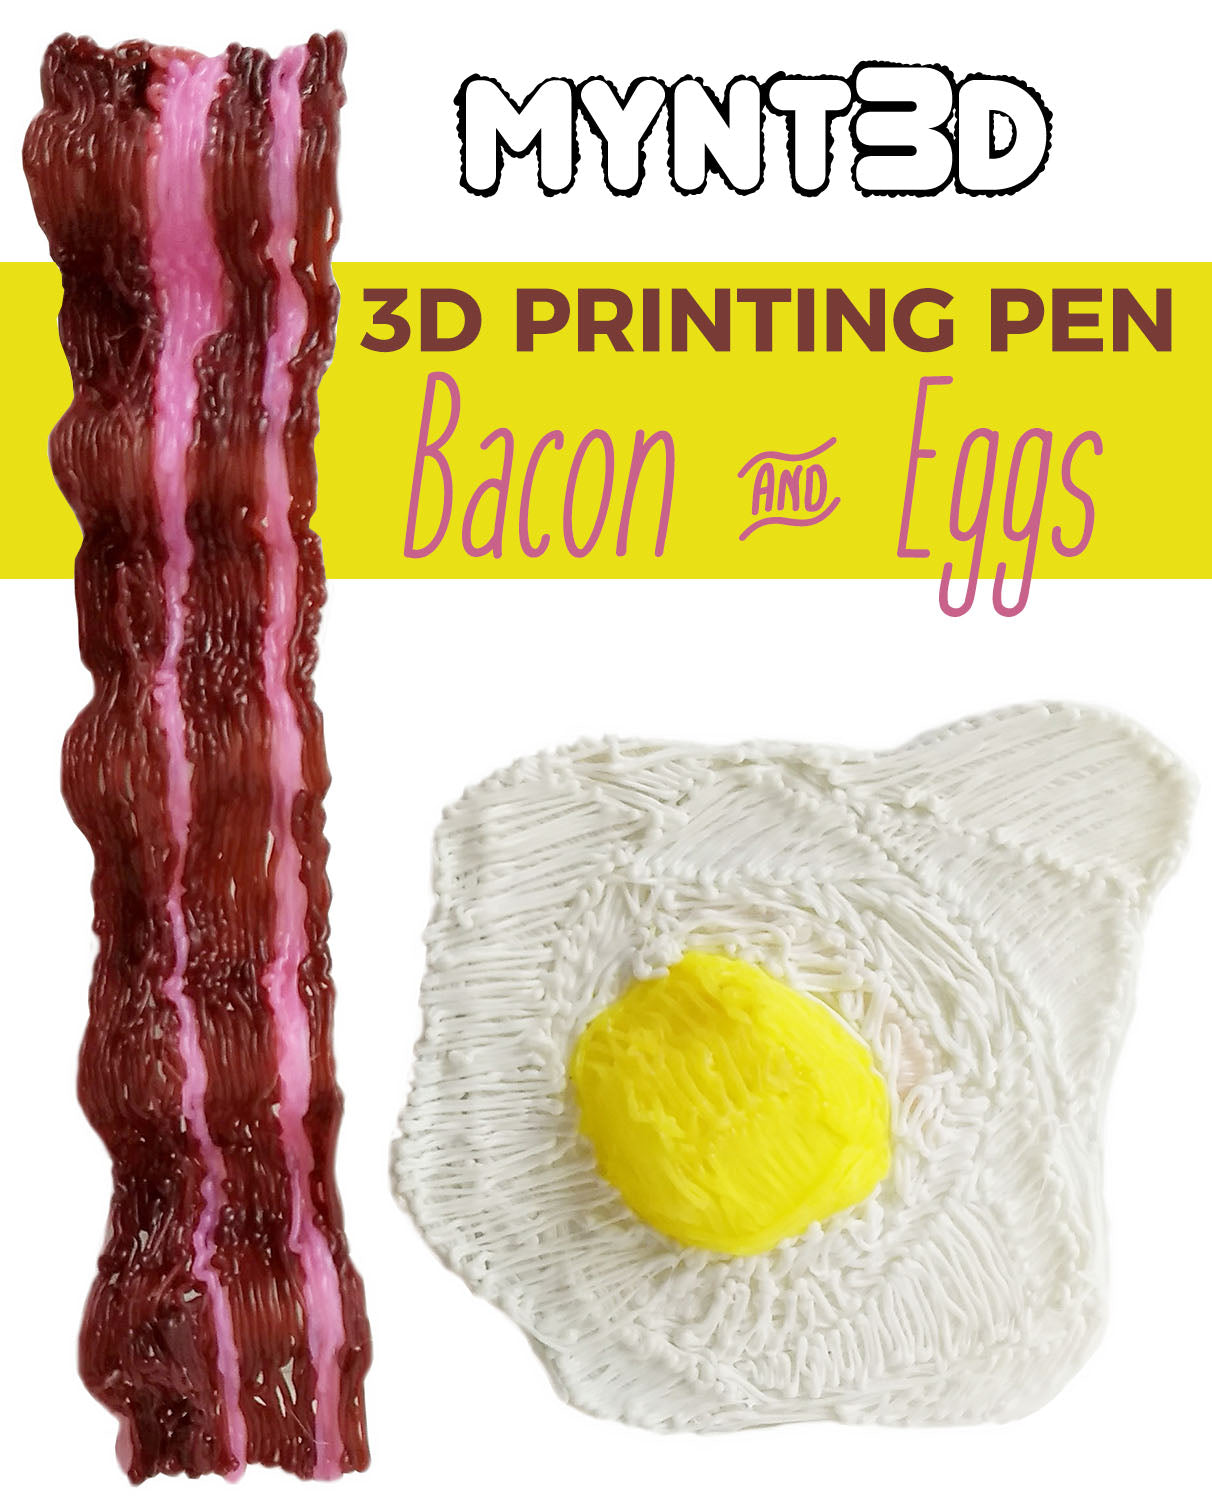 3D Pen Template and Technique for Drawing Bacon and Eggs - MYNT3D